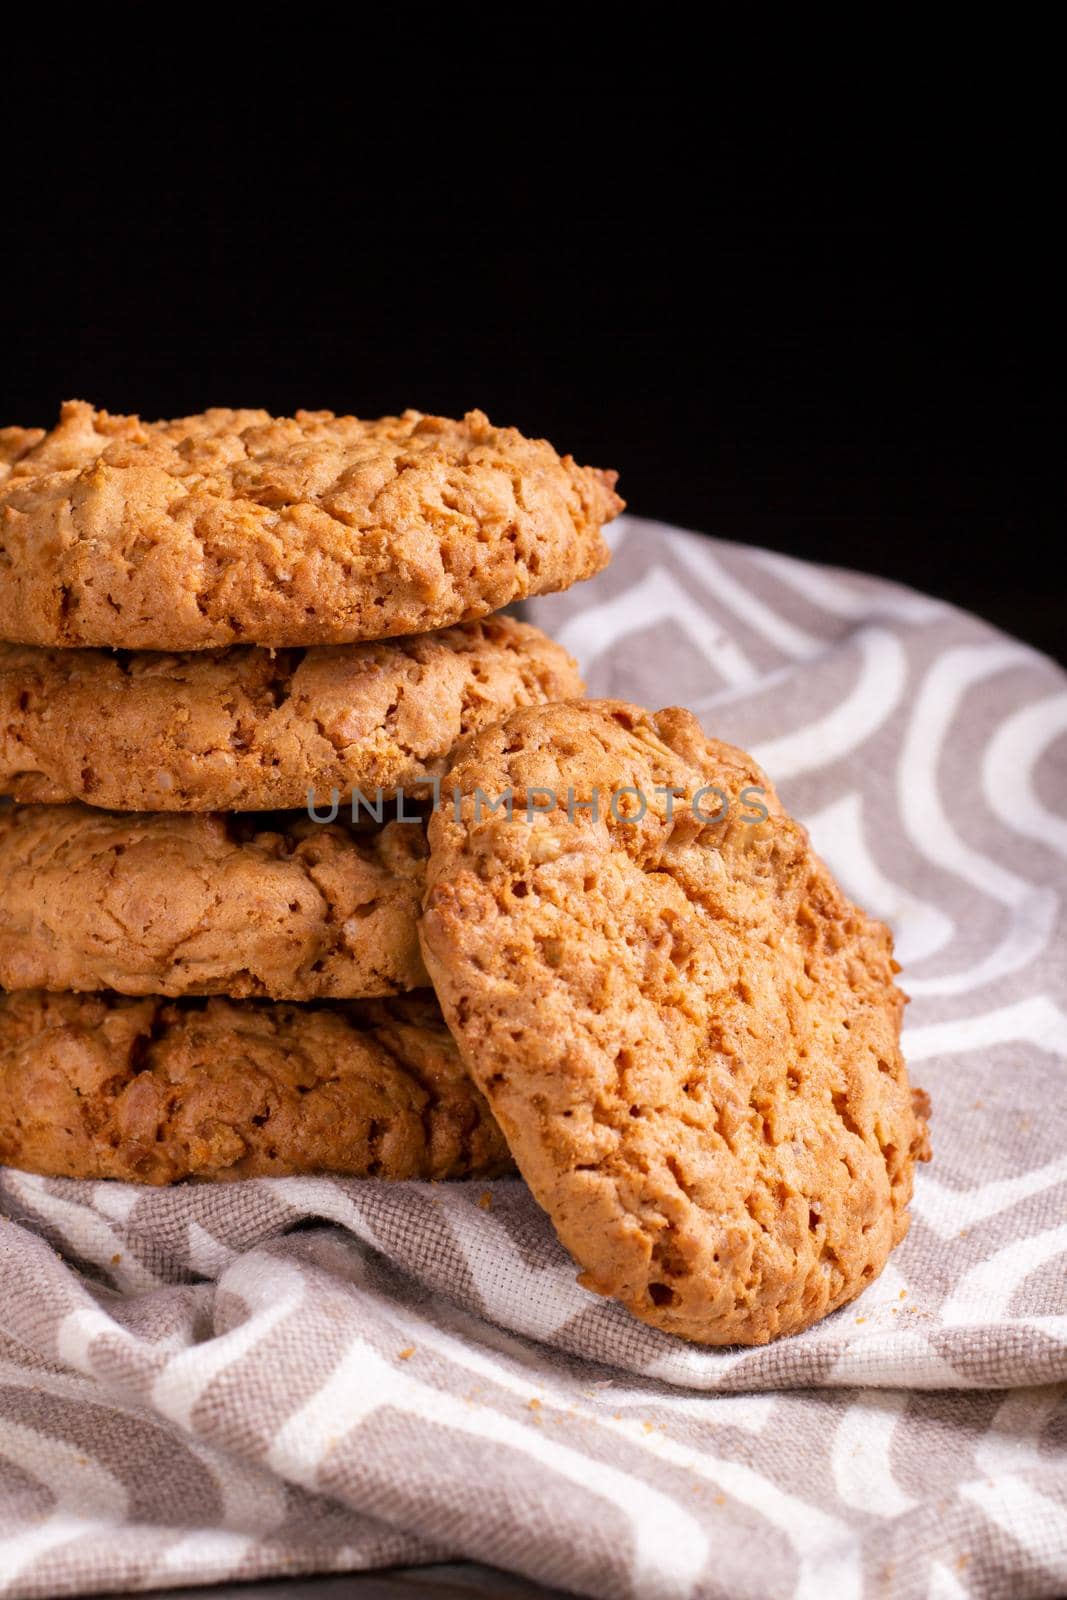 A stack of oatmeal cookies on a kitchen napkin on a wooden table against the dark background of the wal.